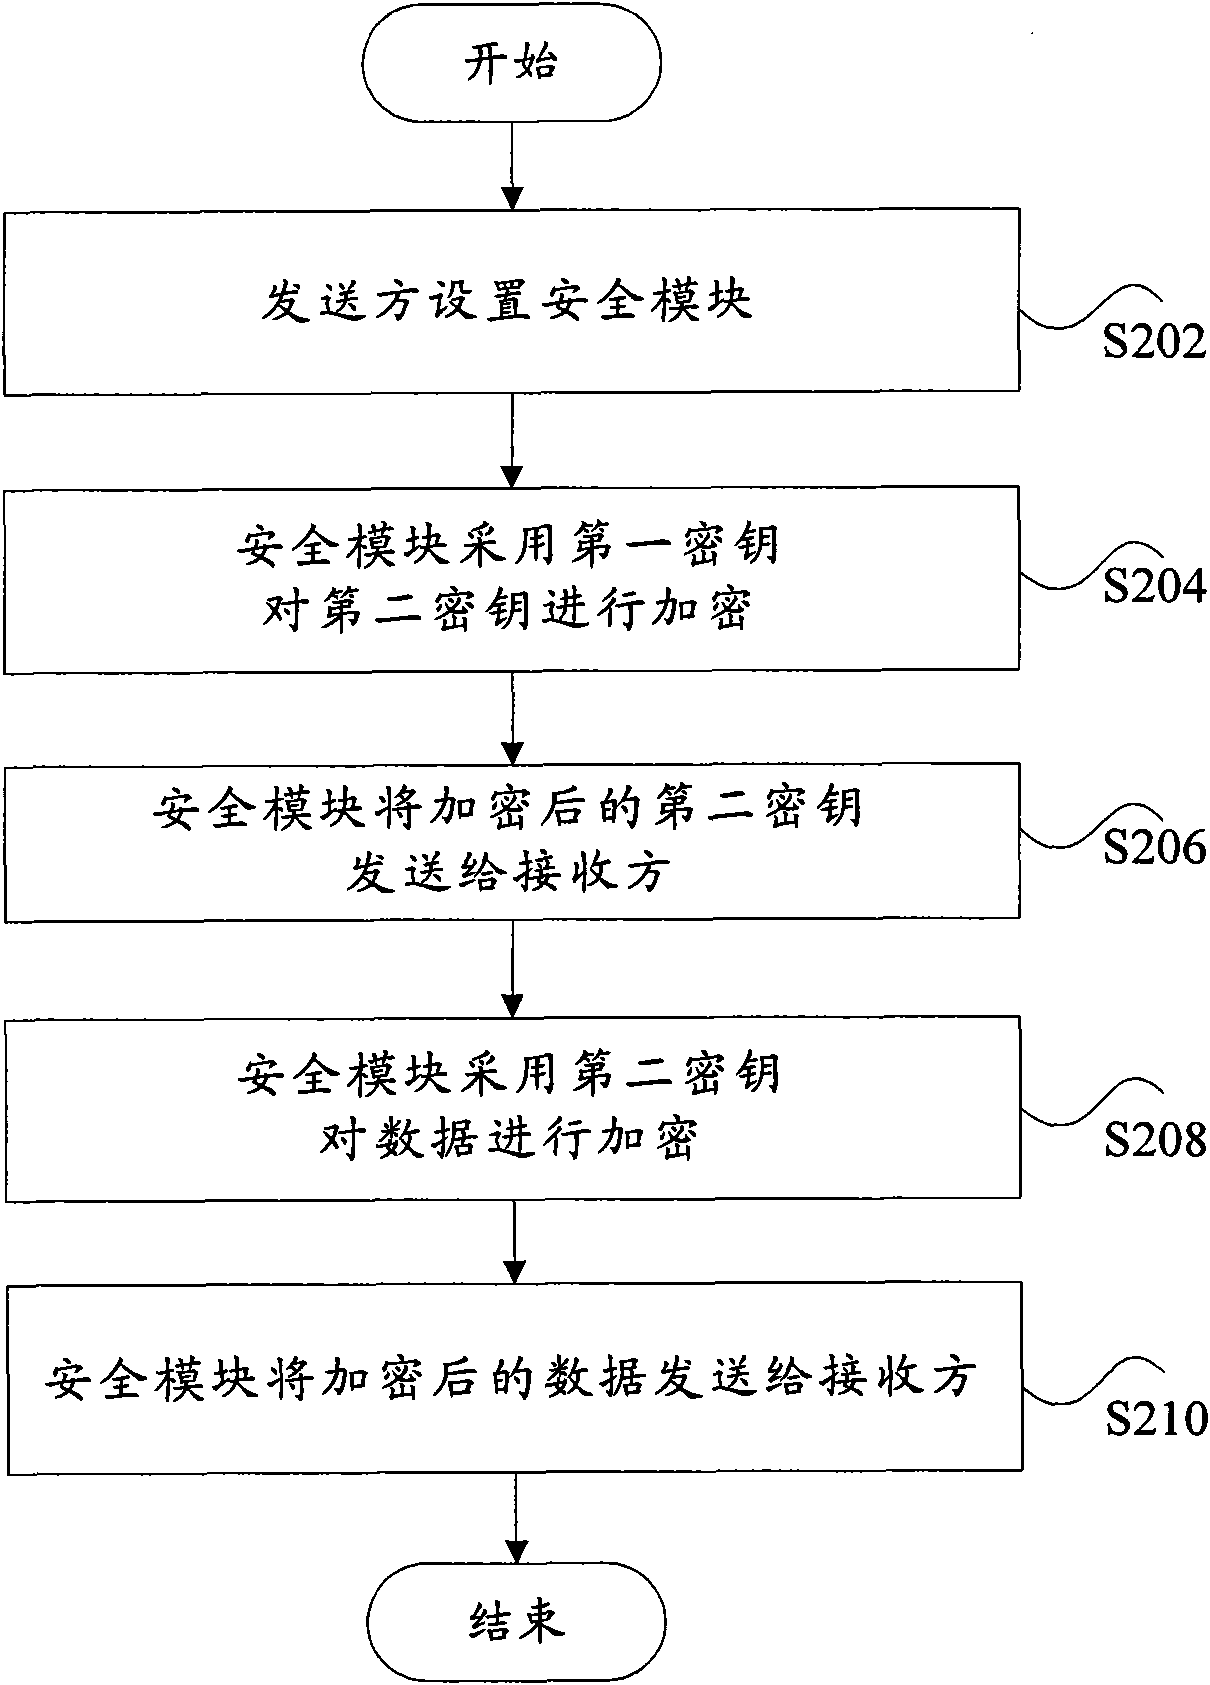 Point-to-point communication method based on near field communication and near field communication device